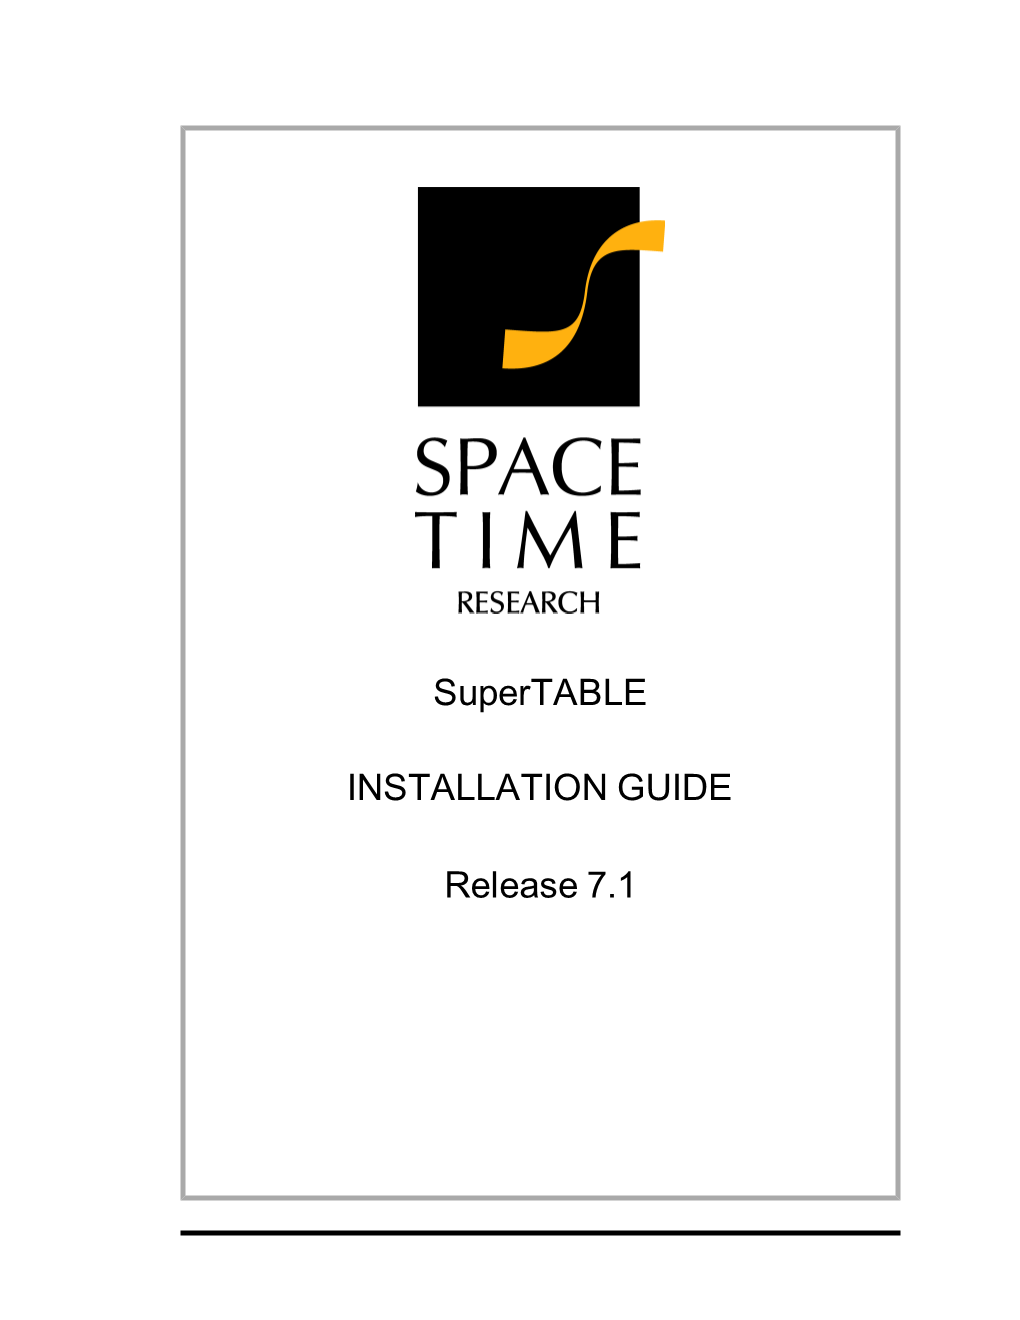 Supertable Installation Guide